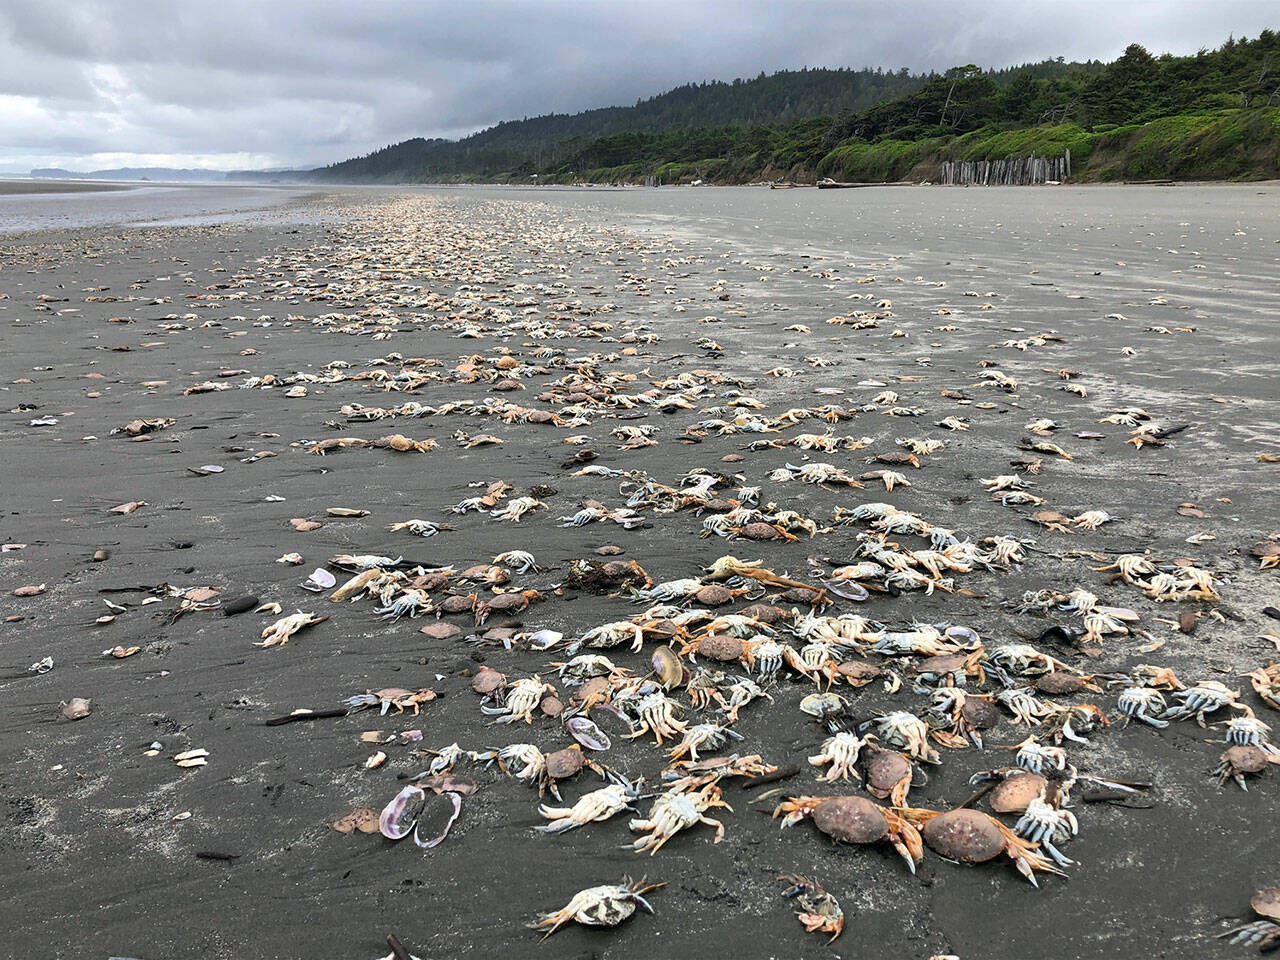 Jenny Waddell/National Oceanic and Atmospheric Administration, Olympic Coast National Marine Sanctuary
Massive die-offs of Dungeness crab have been documented off the Pacific Northwest Coast. Once dead, the aquatic crabs often wash up on beaches, such as the ones photographed on Kalaloch Beach on June 14, 2022.